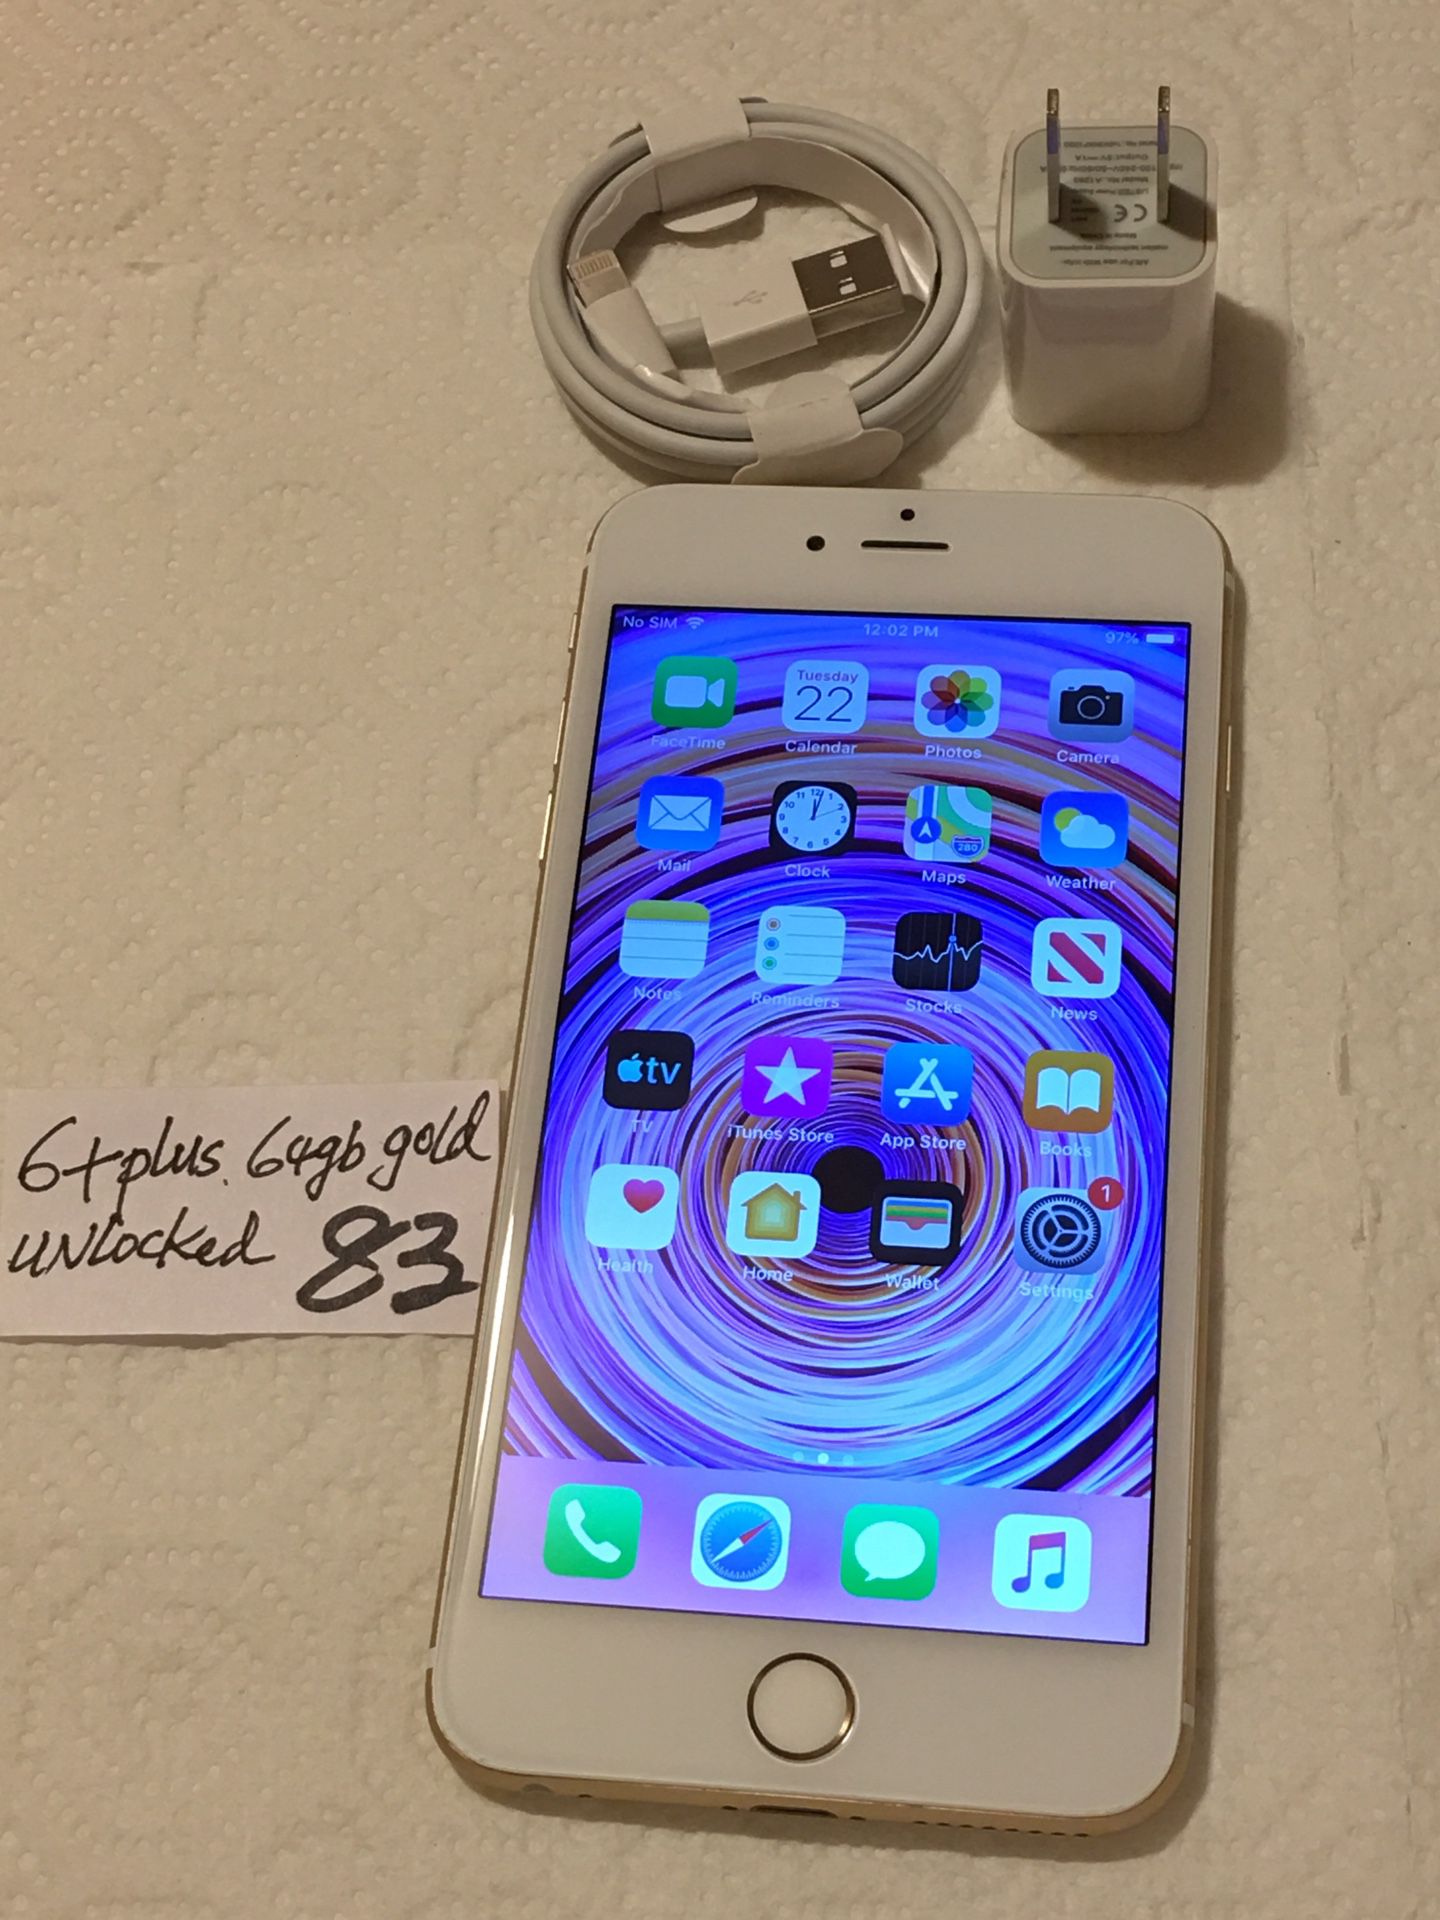 Apple iPhone 6+ Plus, 64 GB, Unlocked any carrier. Silver/White,Clean imei,Clean iCloud, Fully Functional.Mint Conditions.